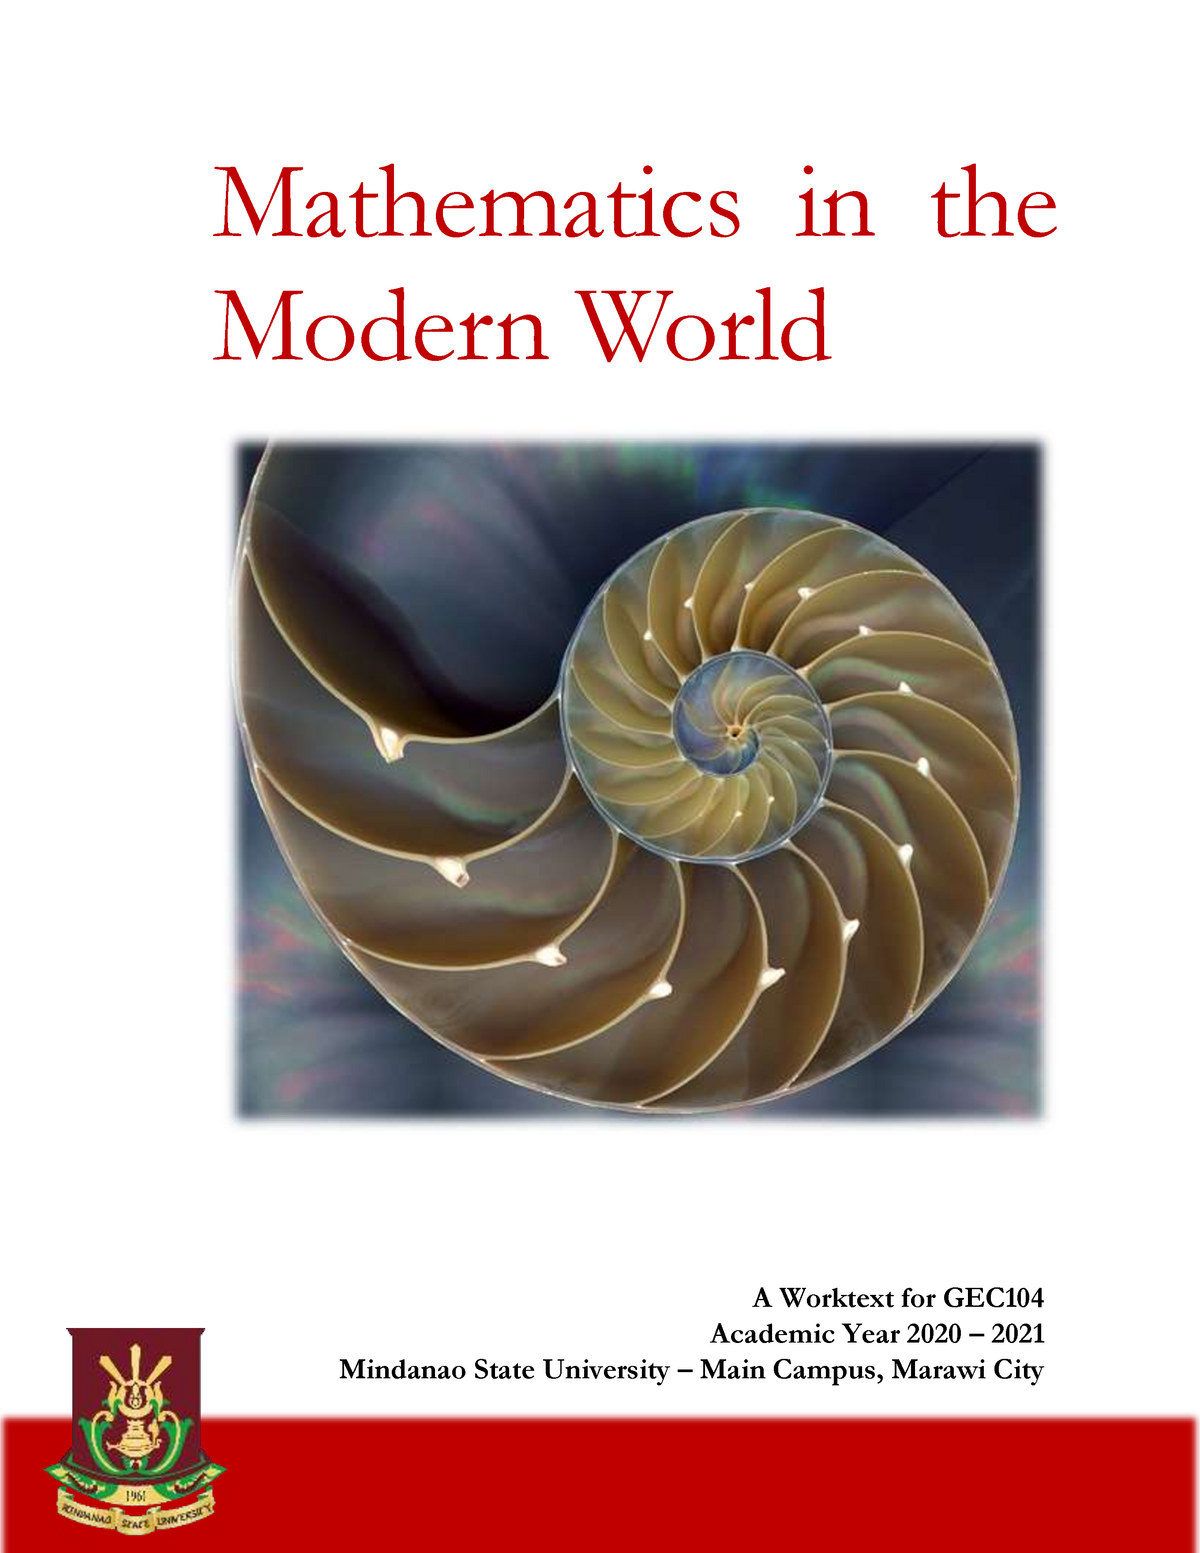 expectation in mathematics in the modern world essay brainly